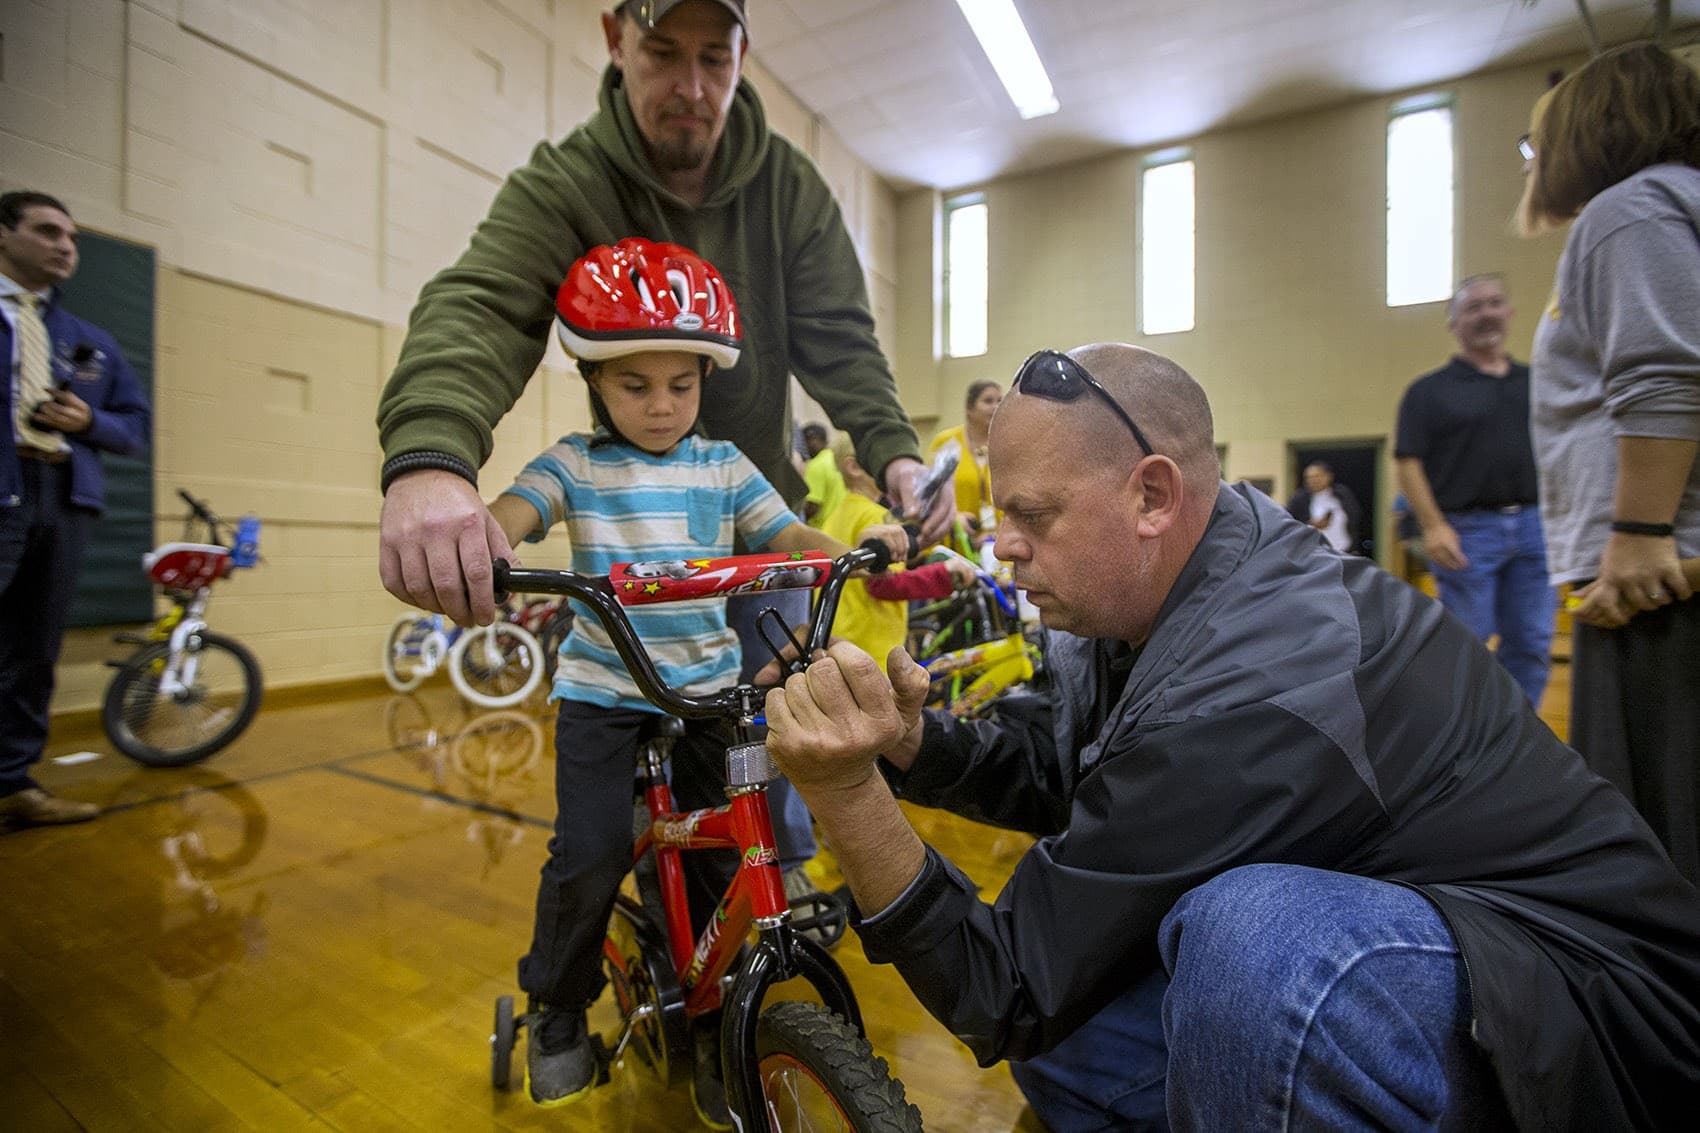 Five-year-old Christopher watches as Bob Charland, right, adjusts the handlebars of the bicycle he just received through the Pedal Thru Youth program at the Stefanik School in Chicopee. (Jesse Costa/WBUR)